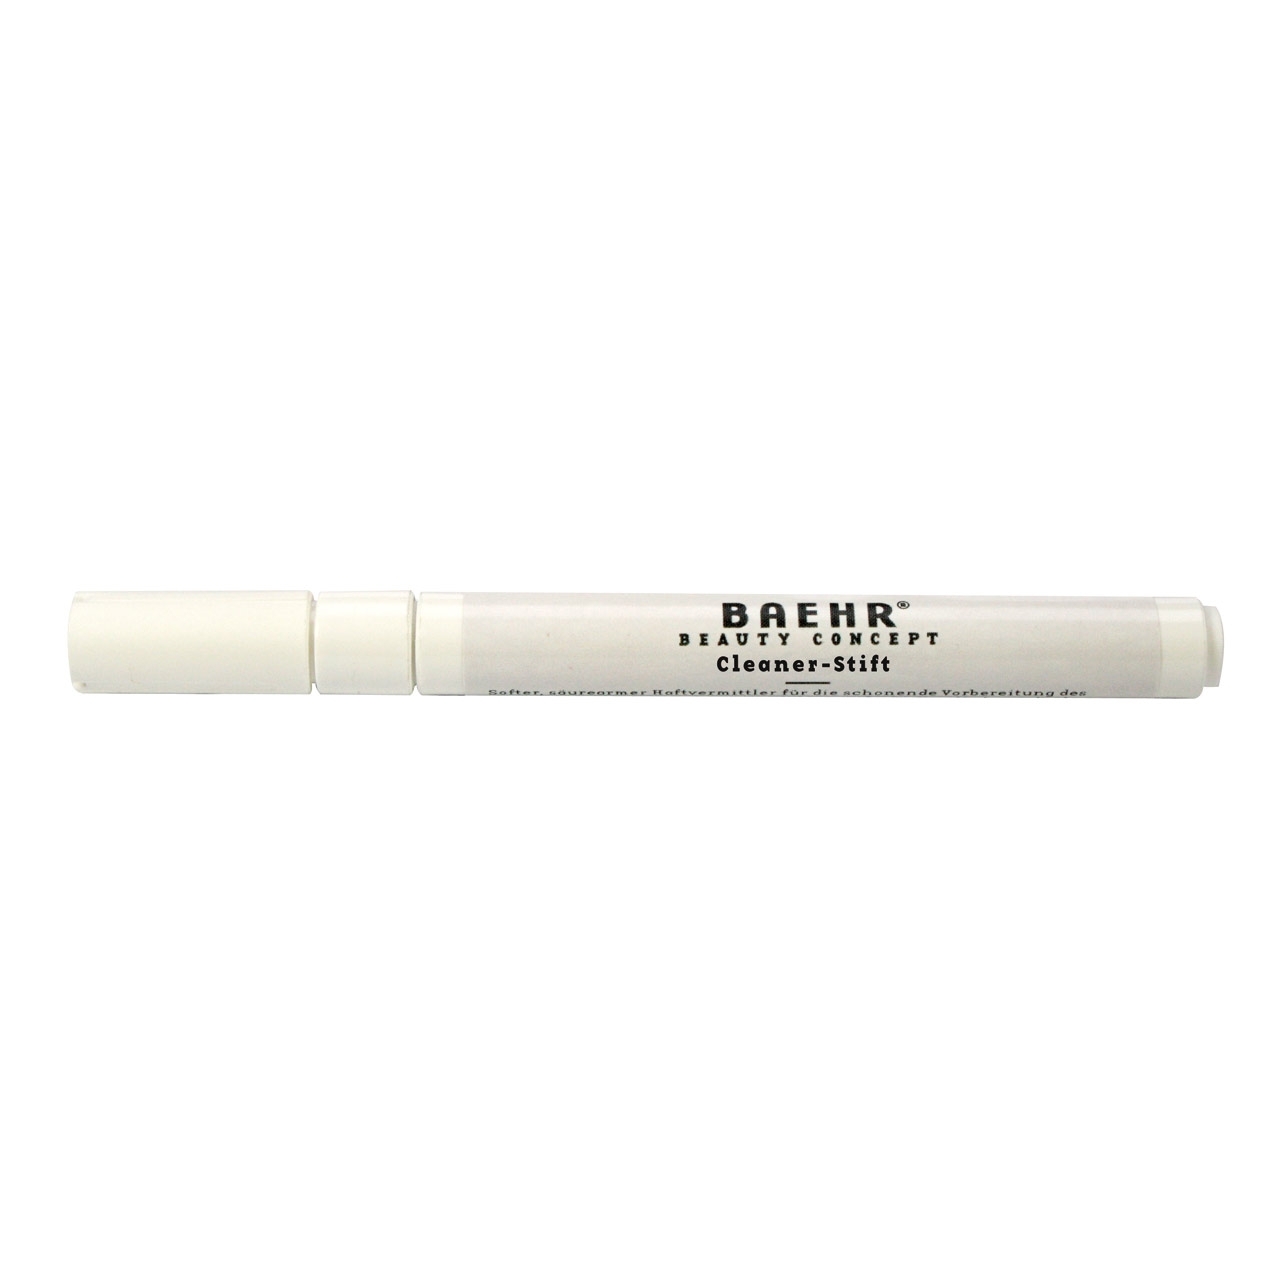 BAEHR BEAUTY CONCEPT - NAILS Cleaner-Stift 3 ml